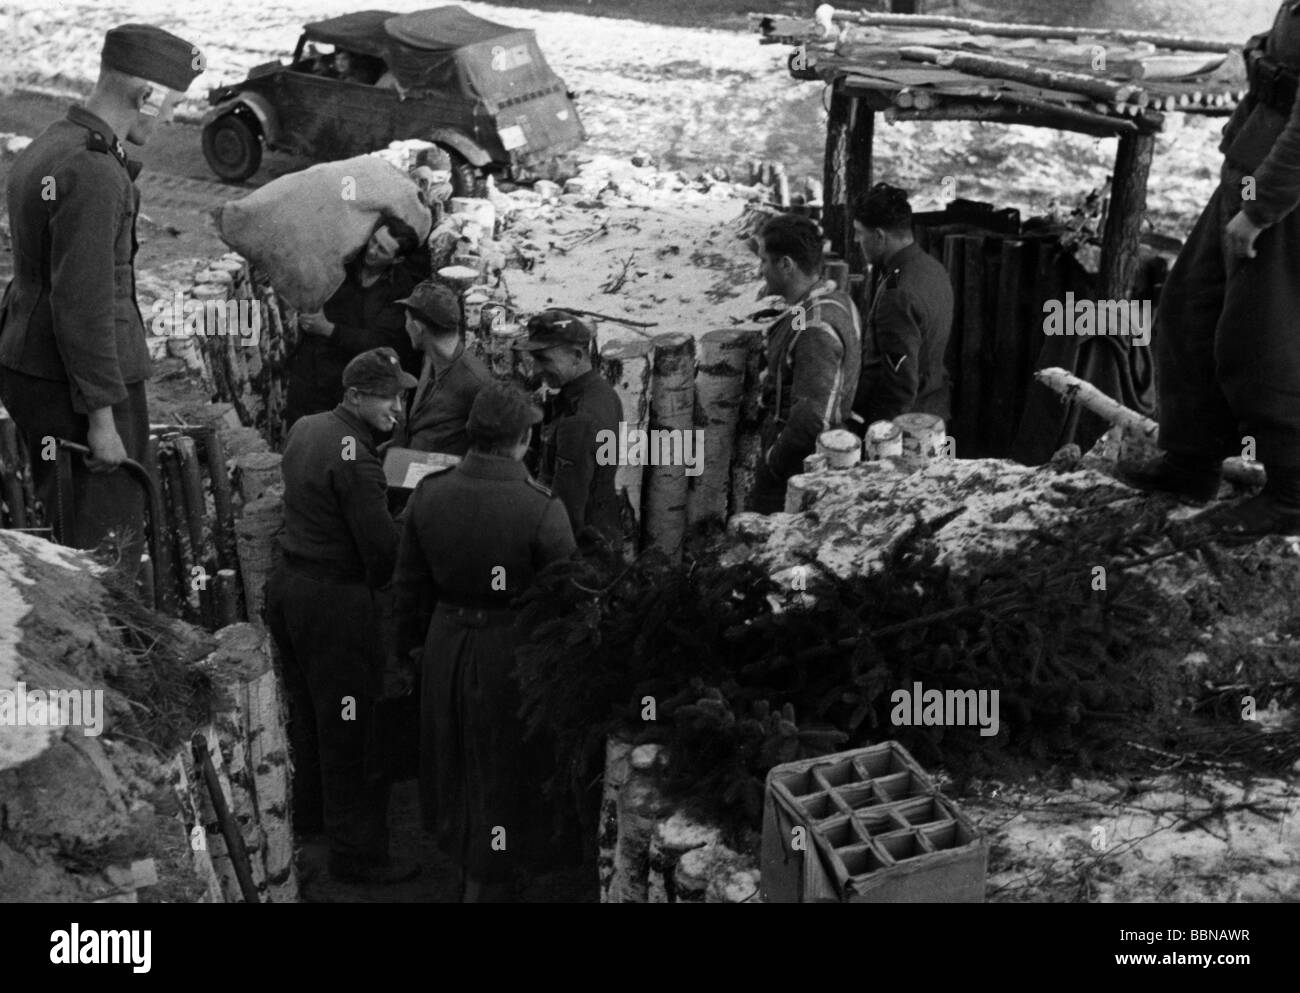 events, Second World War / WWII, Russia 1944 / 1945, Waffen-SS soldiers getting mail, Ukraine, winter 1943 / 1944, Stock Photo